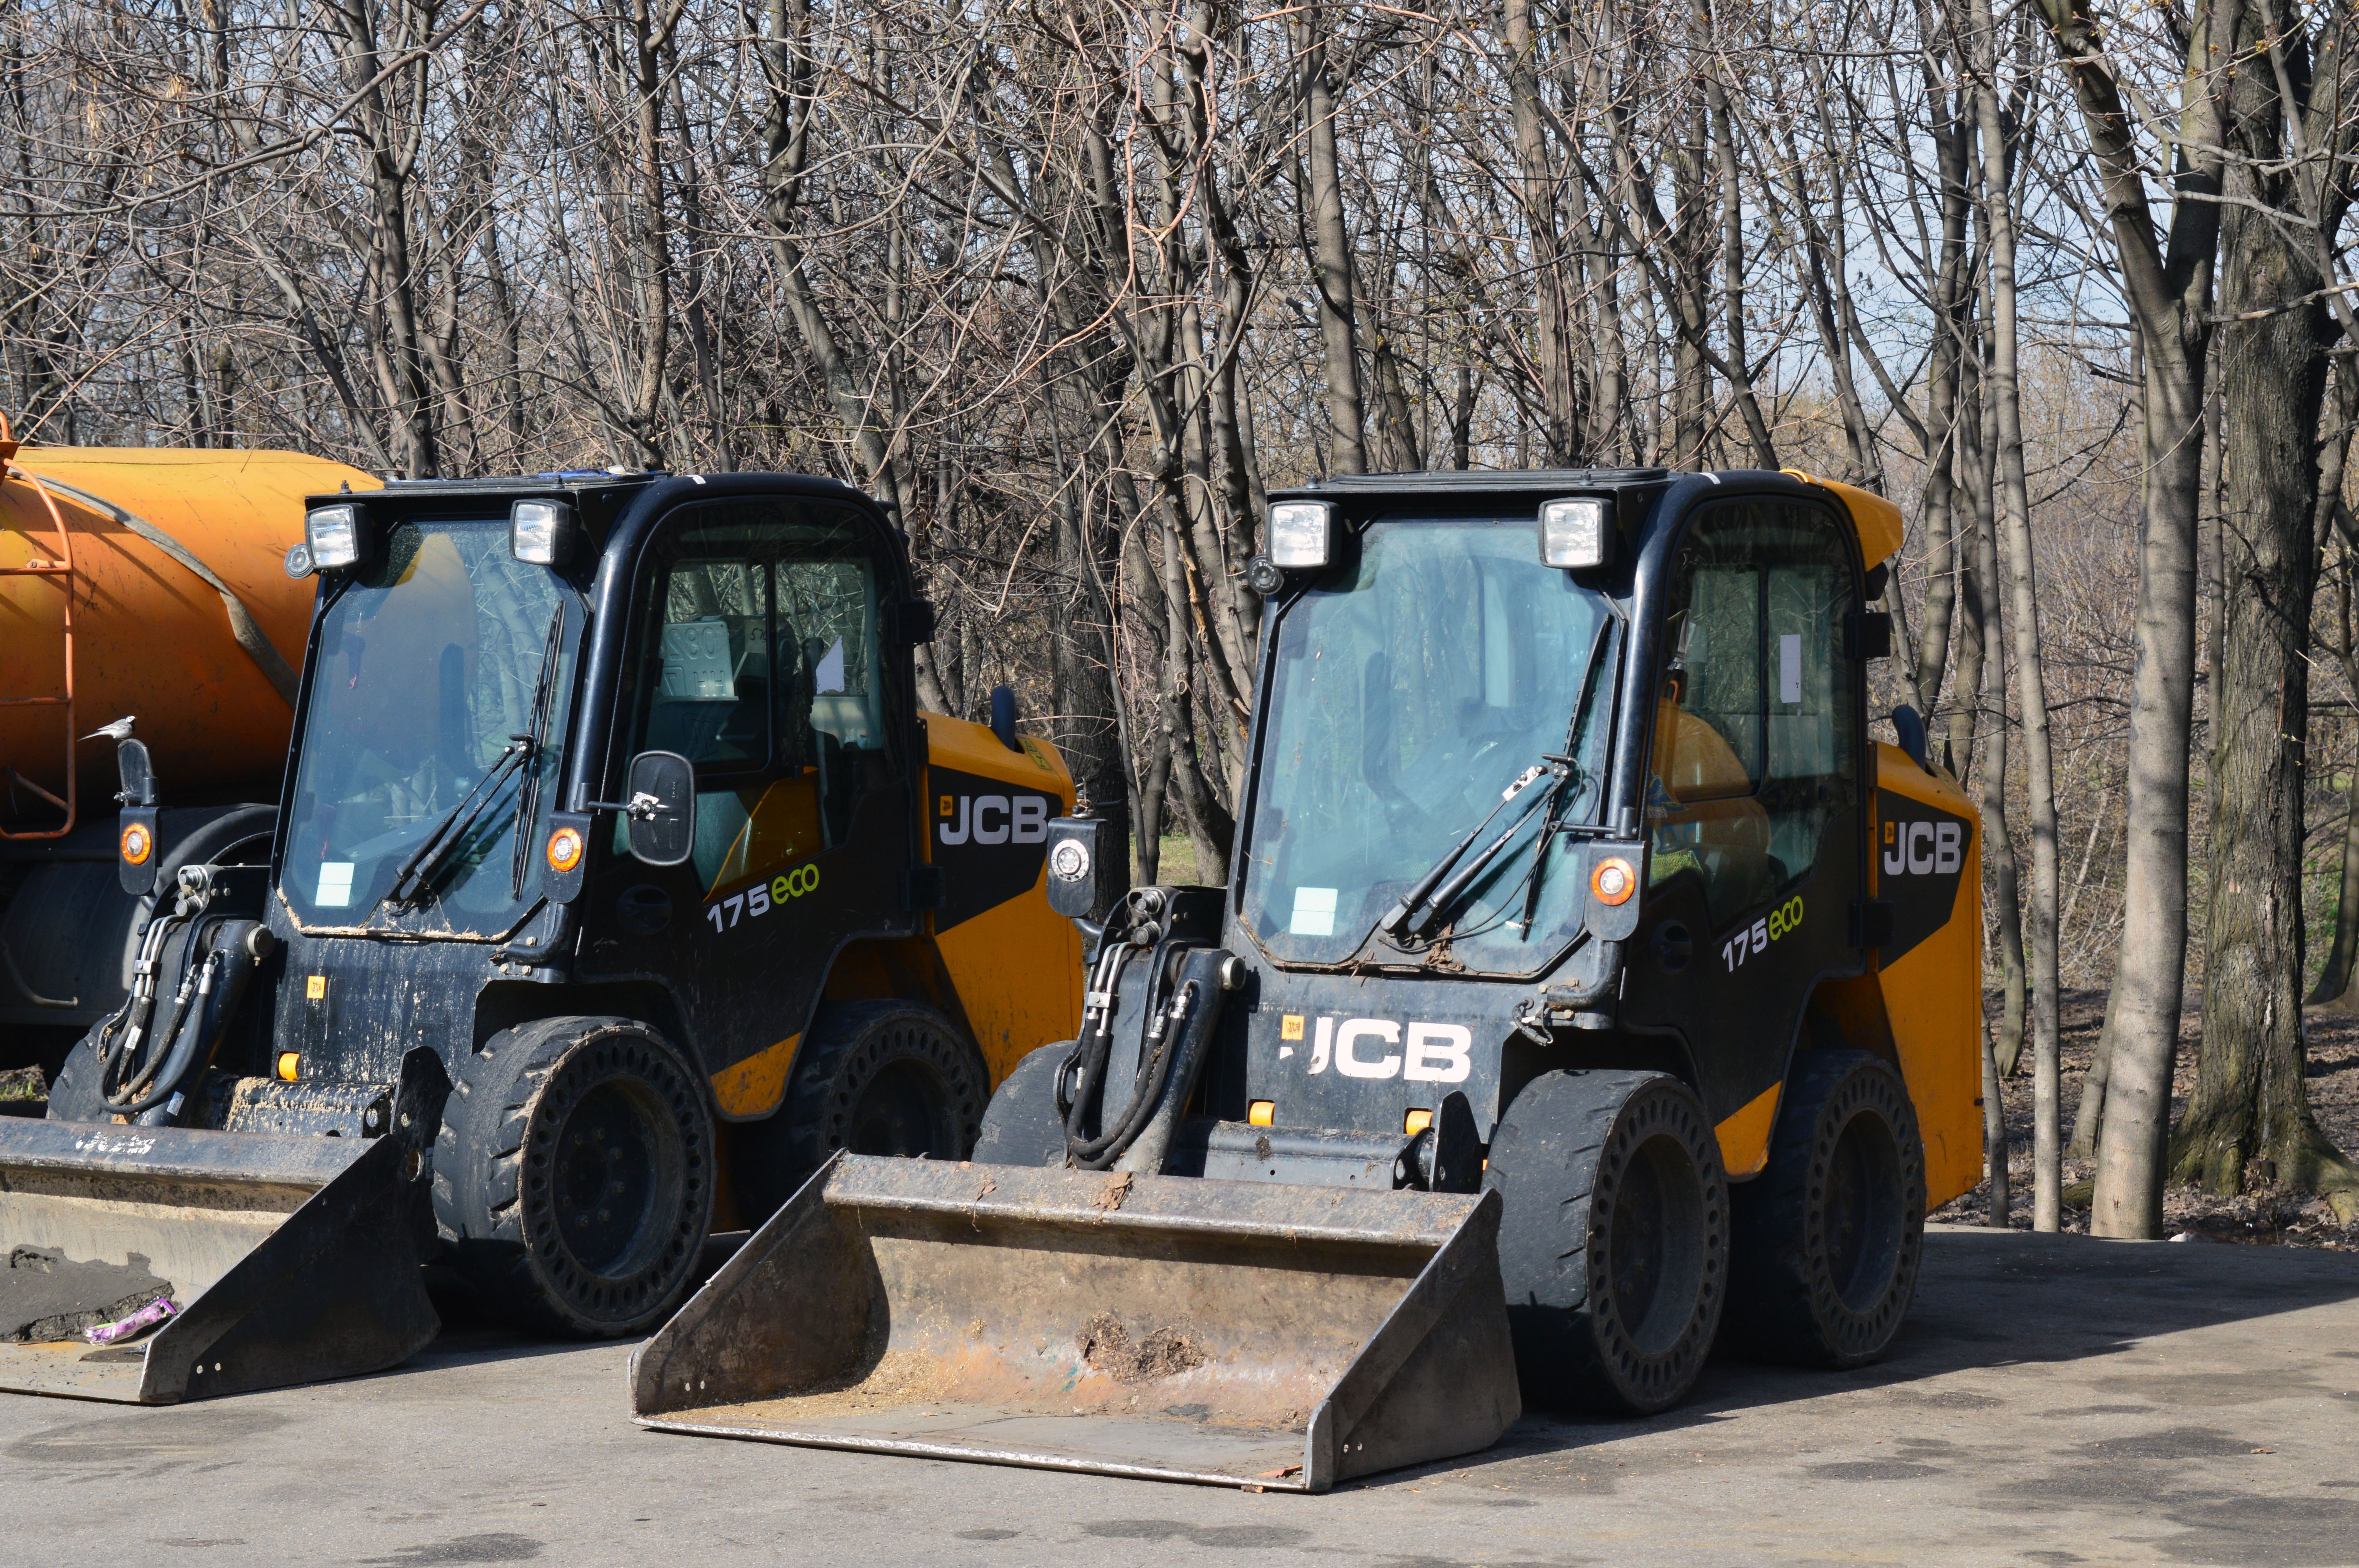 2 black and yellow jcb skid loaders